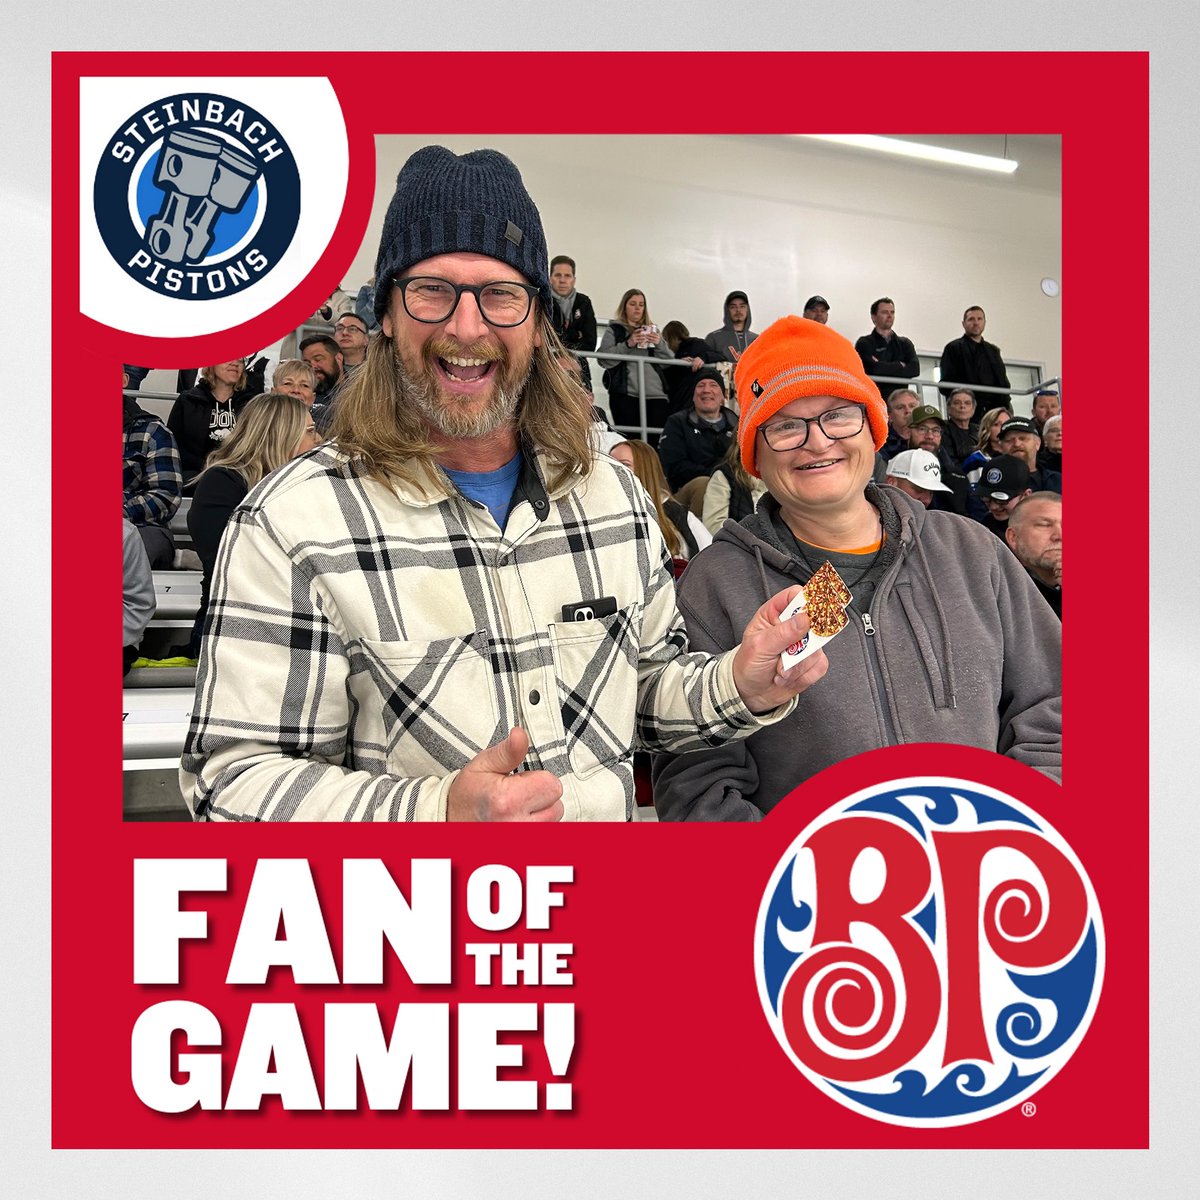 Congrats to tonight’s BP Steinbach Fan of the Game!! 

#OneMore #PistonsHockey